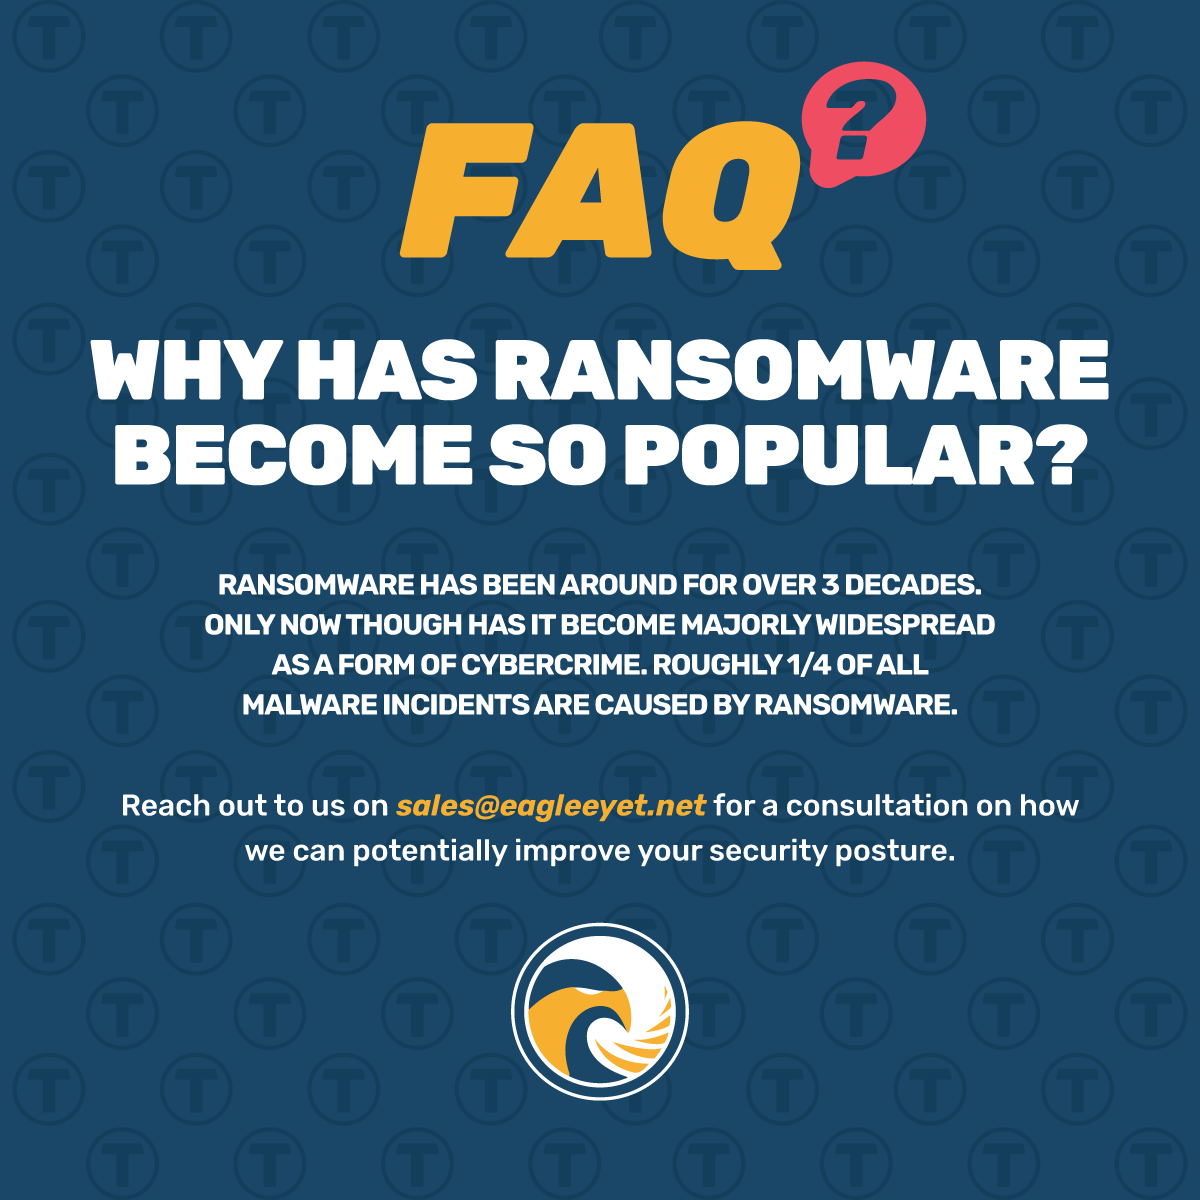 FAQ – Why Has Ransomware Become So Popular